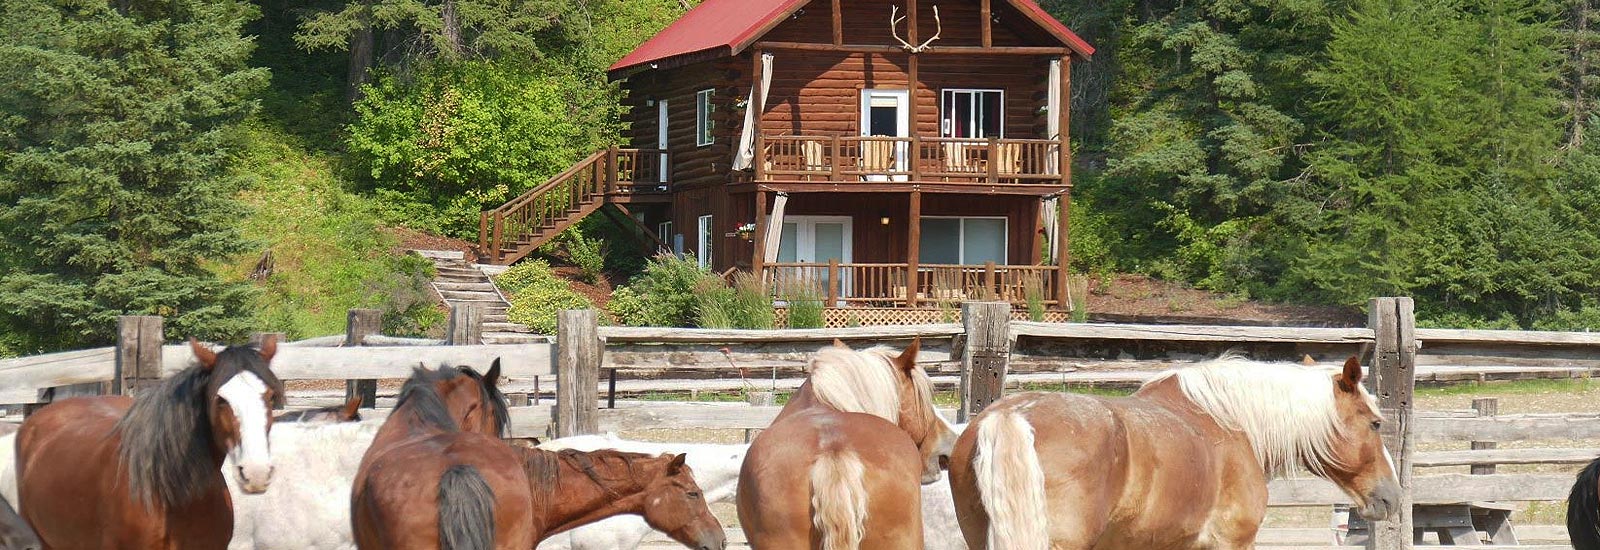 The Bar W Guest Ranch - Whitefish MT - Ranch Values